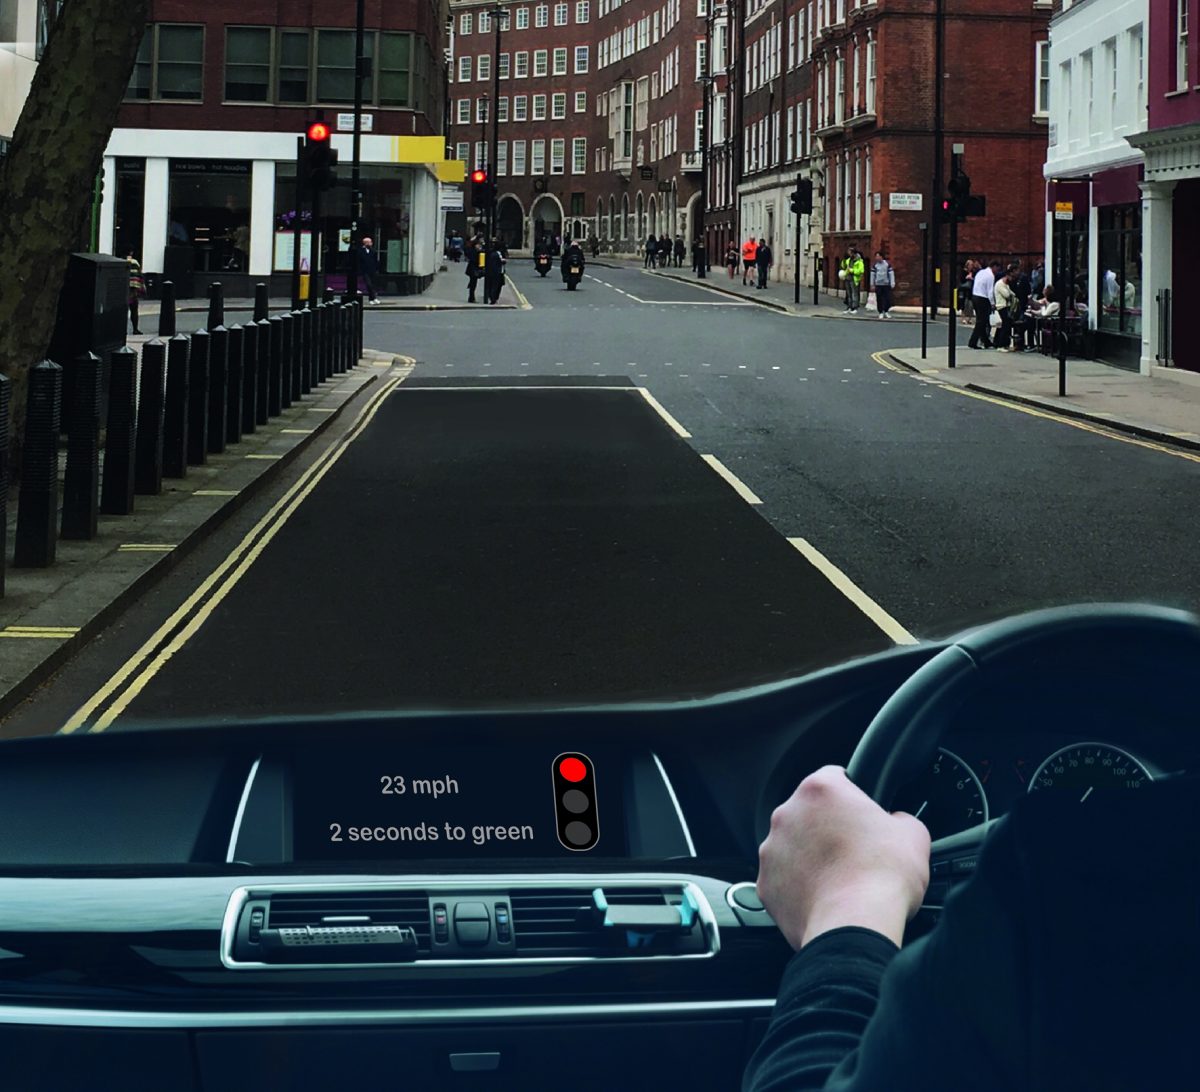 How drivers could be notified of the time remaining before traffic lights change